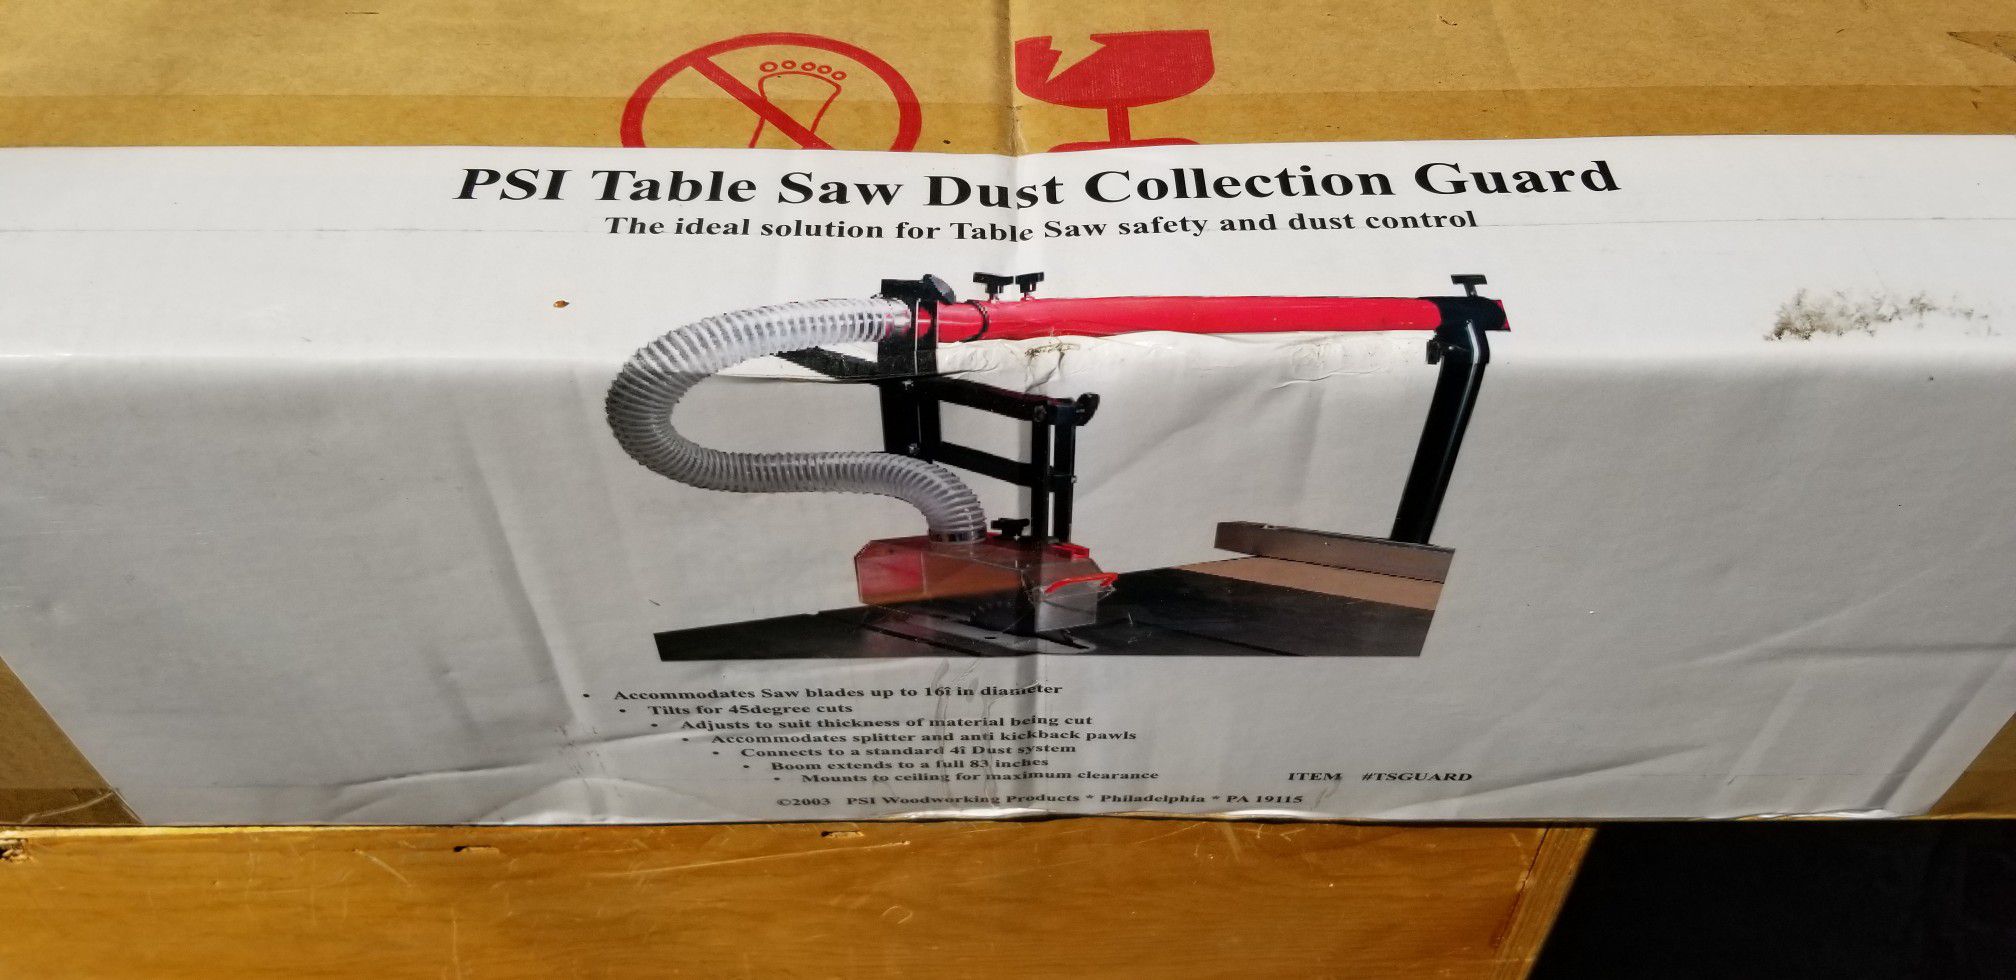 Table Saw collection dust guard